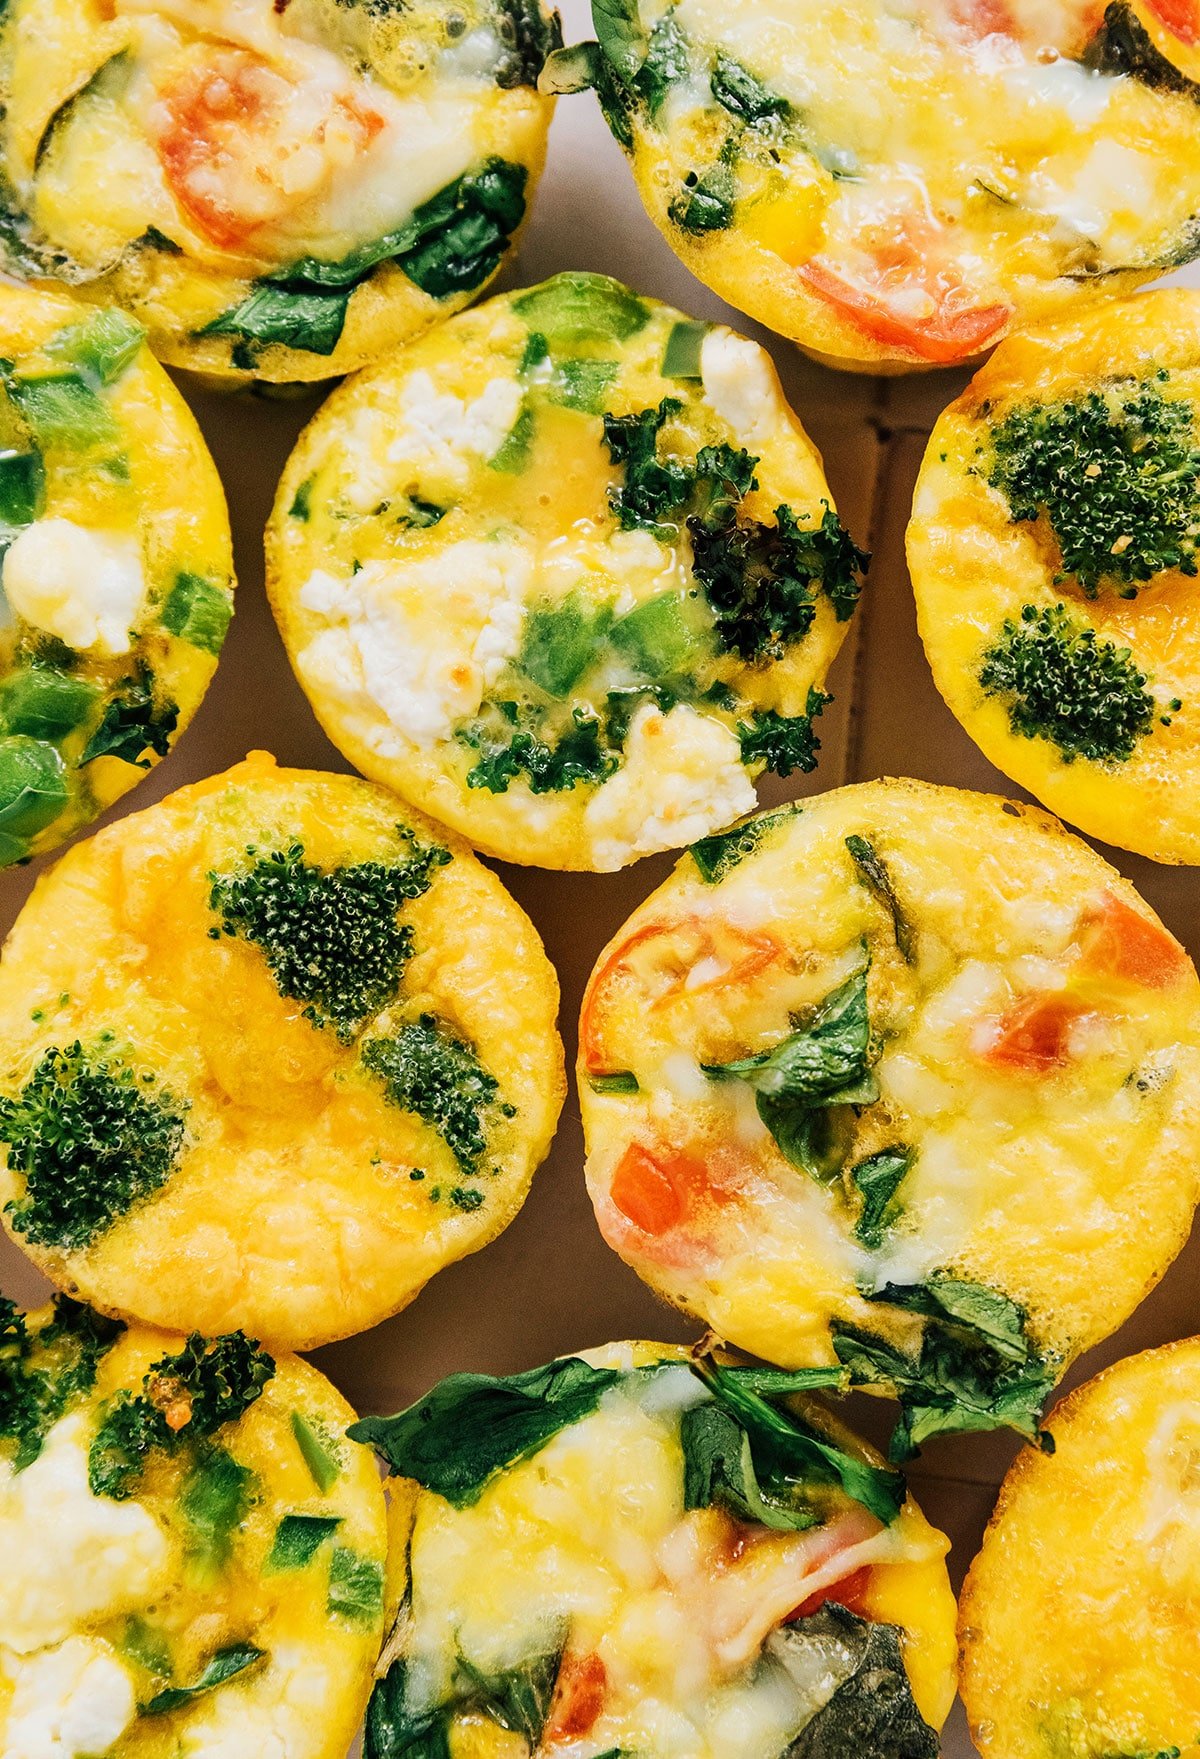 Individual egg cups made with veggies such as broccoli, spinach, and tomato.